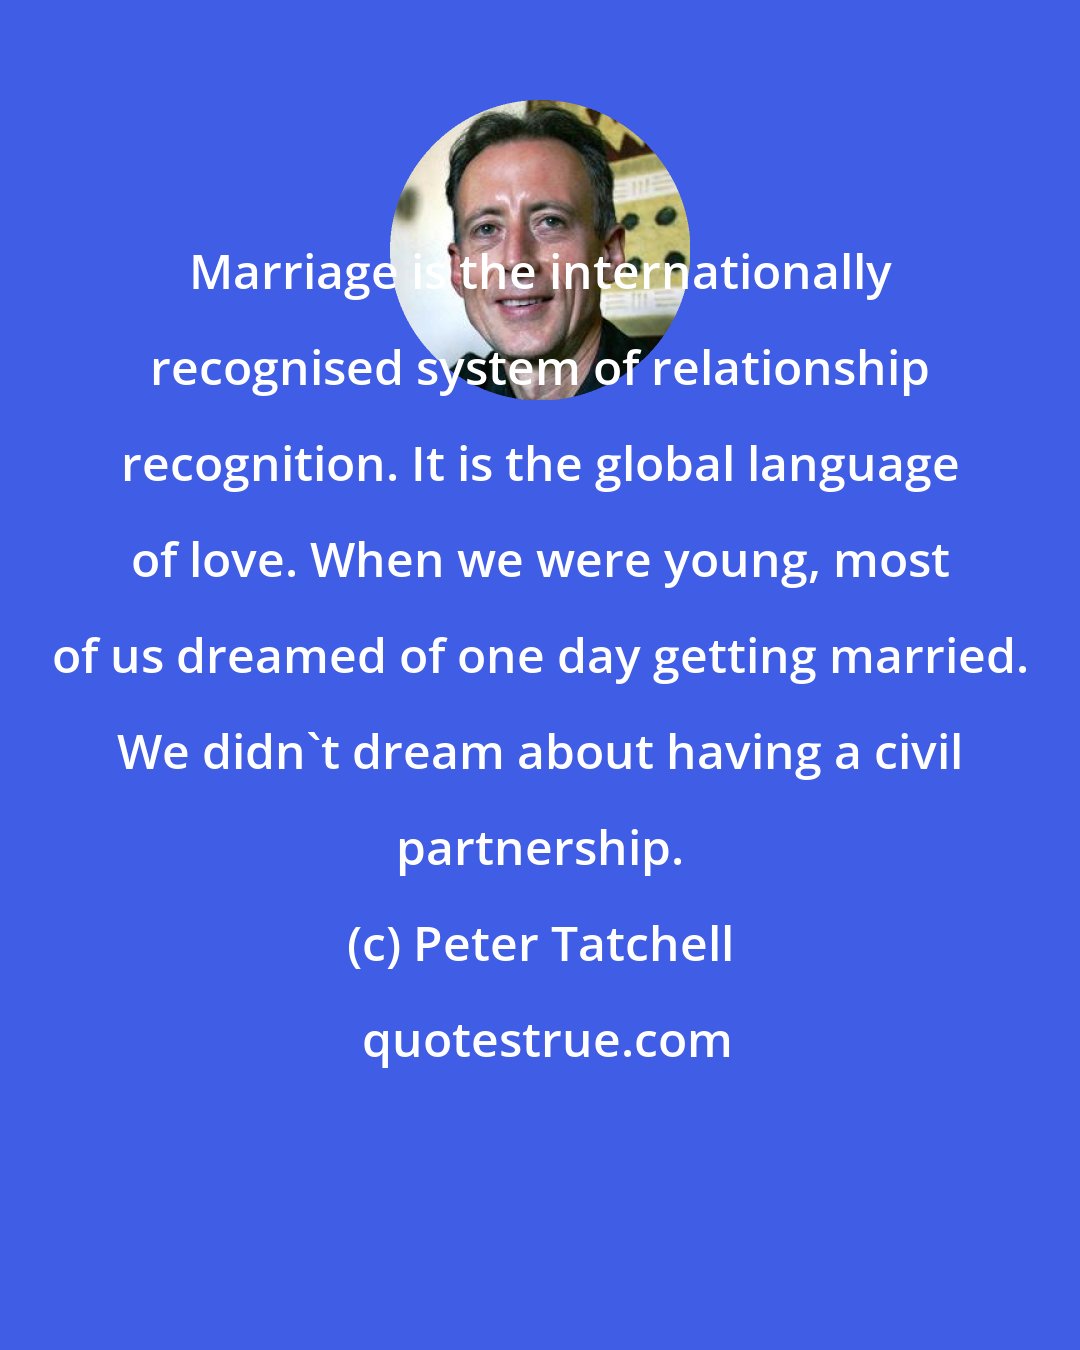 Peter Tatchell: Marriage is the internationally recognised system of relationship recognition. It is the global language of love. When we were young, most of us dreamed of one day getting married. We didn't dream about having a civil partnership.